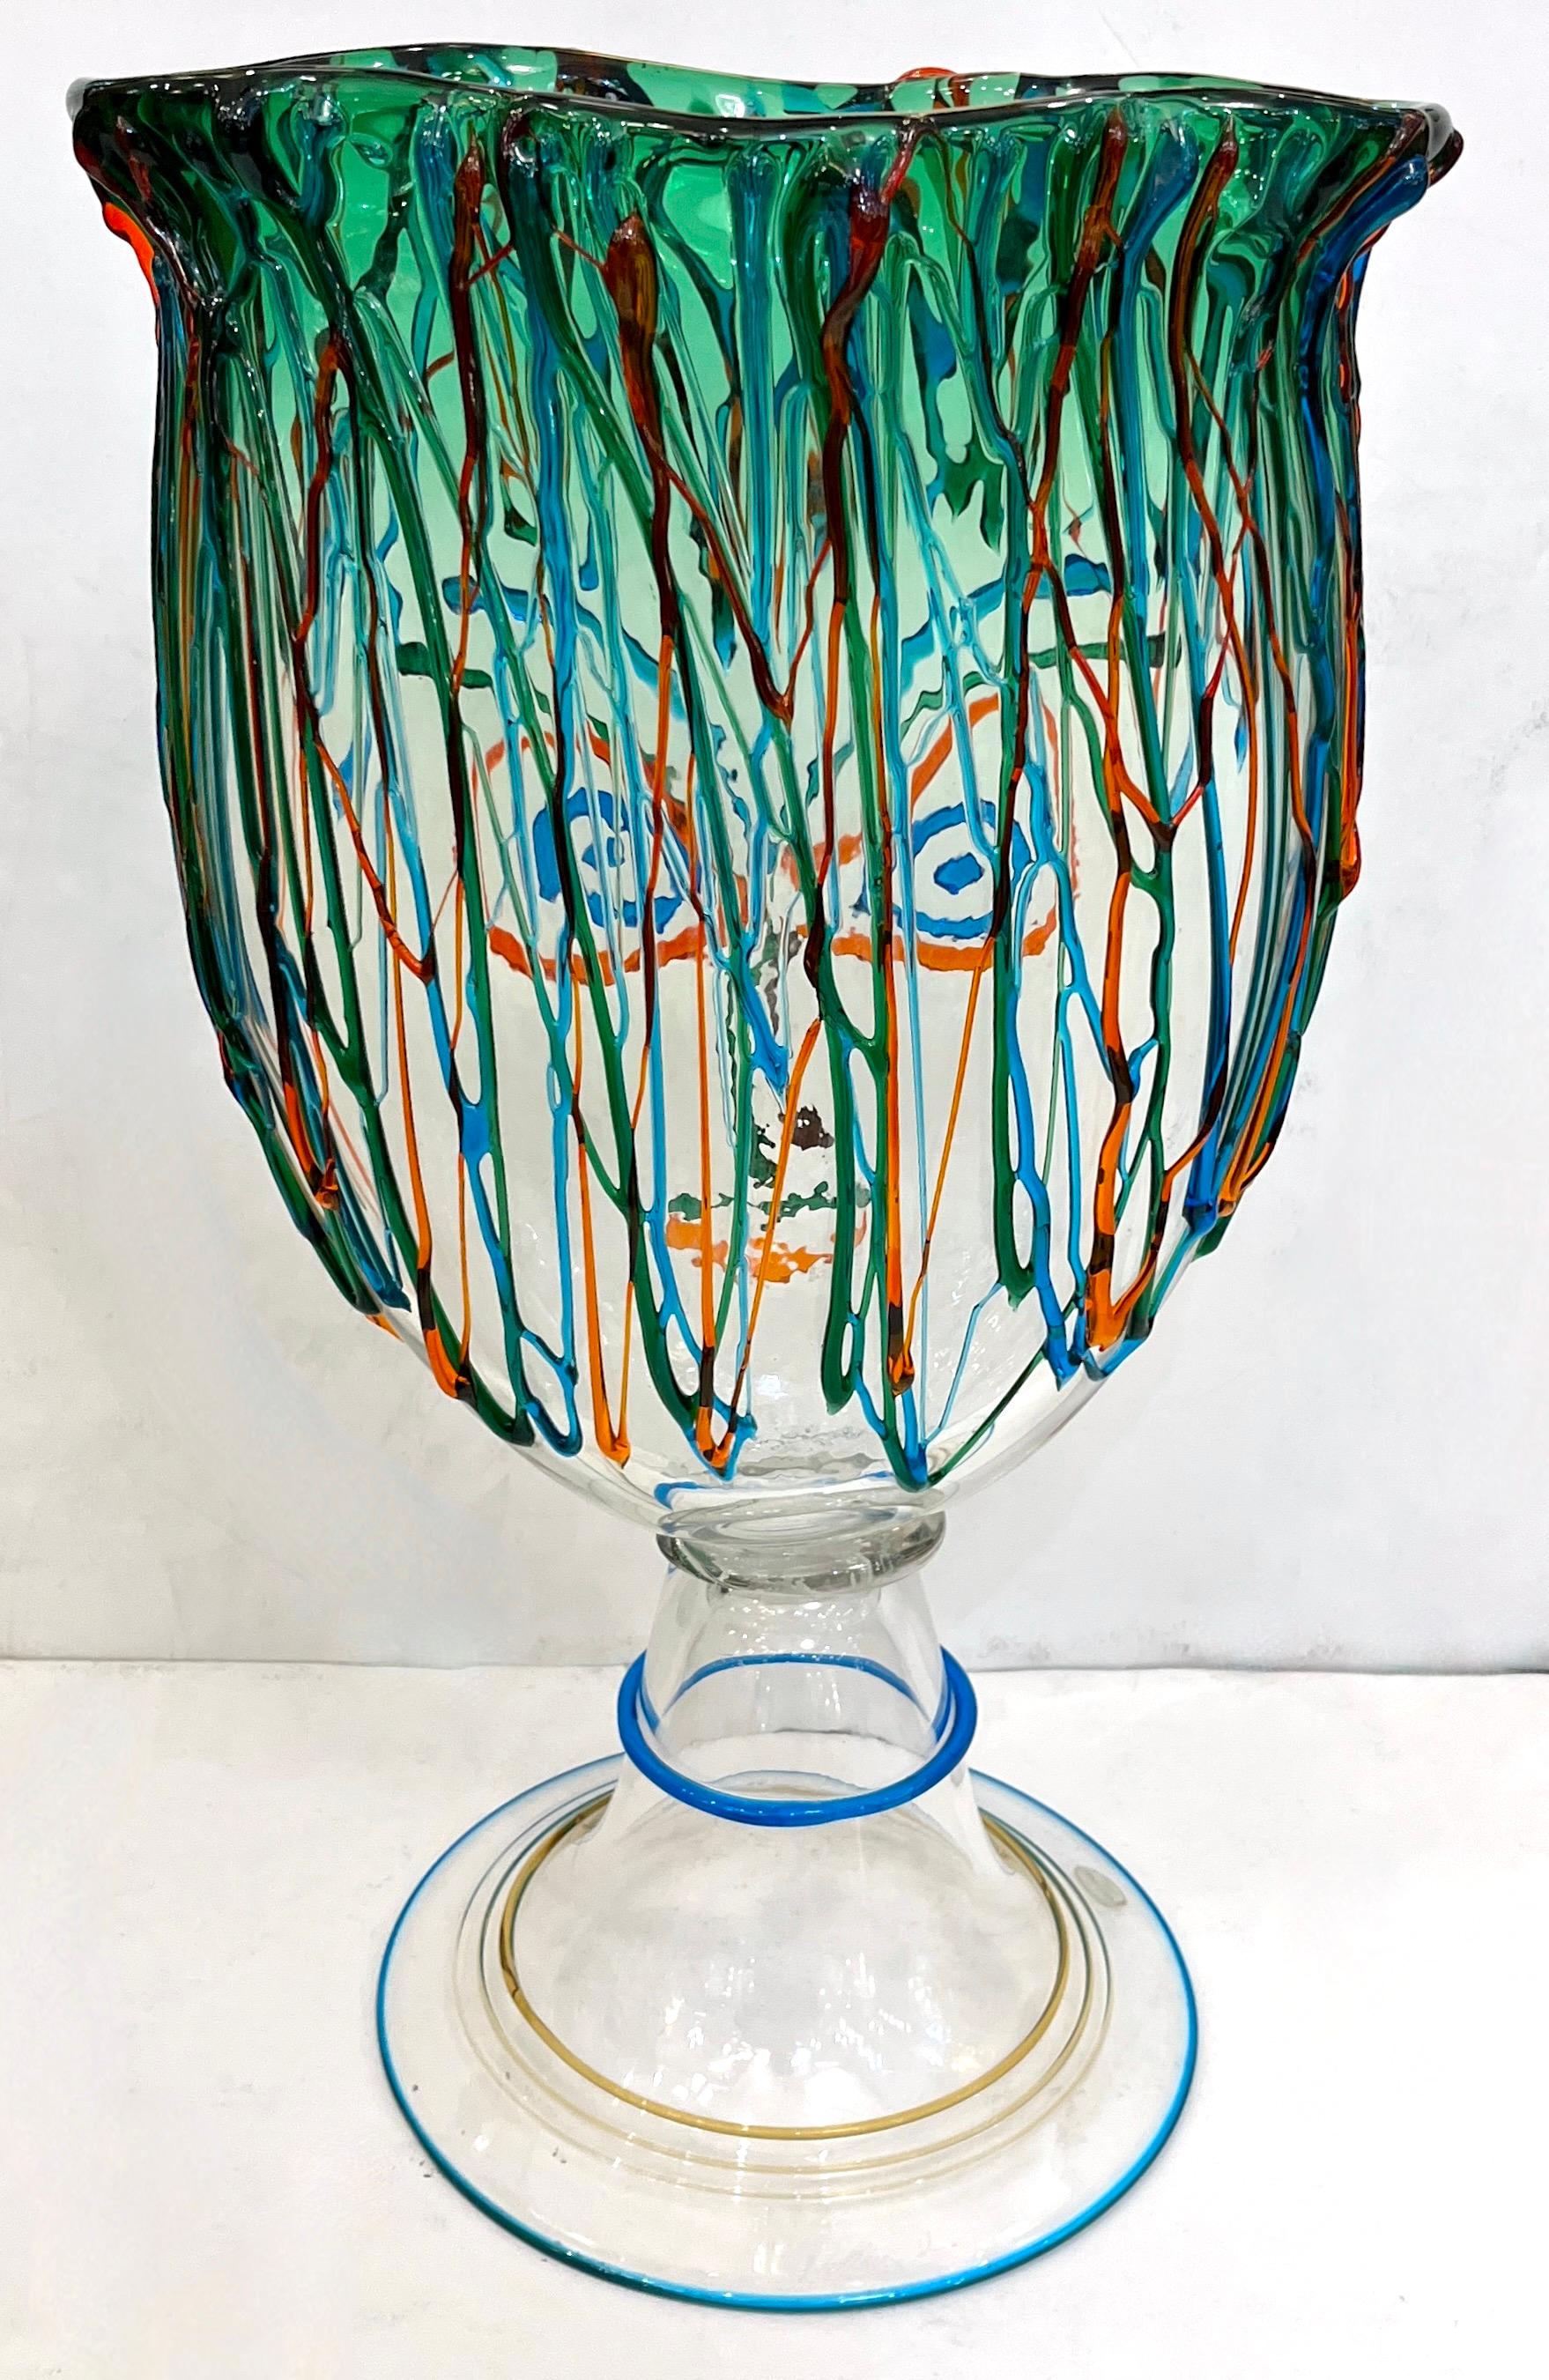 Luigi Mellara Picasso Homage Italian Green Blu Murano Glass Face Vase Sculpture In Excellent Condition For Sale In New York, NY